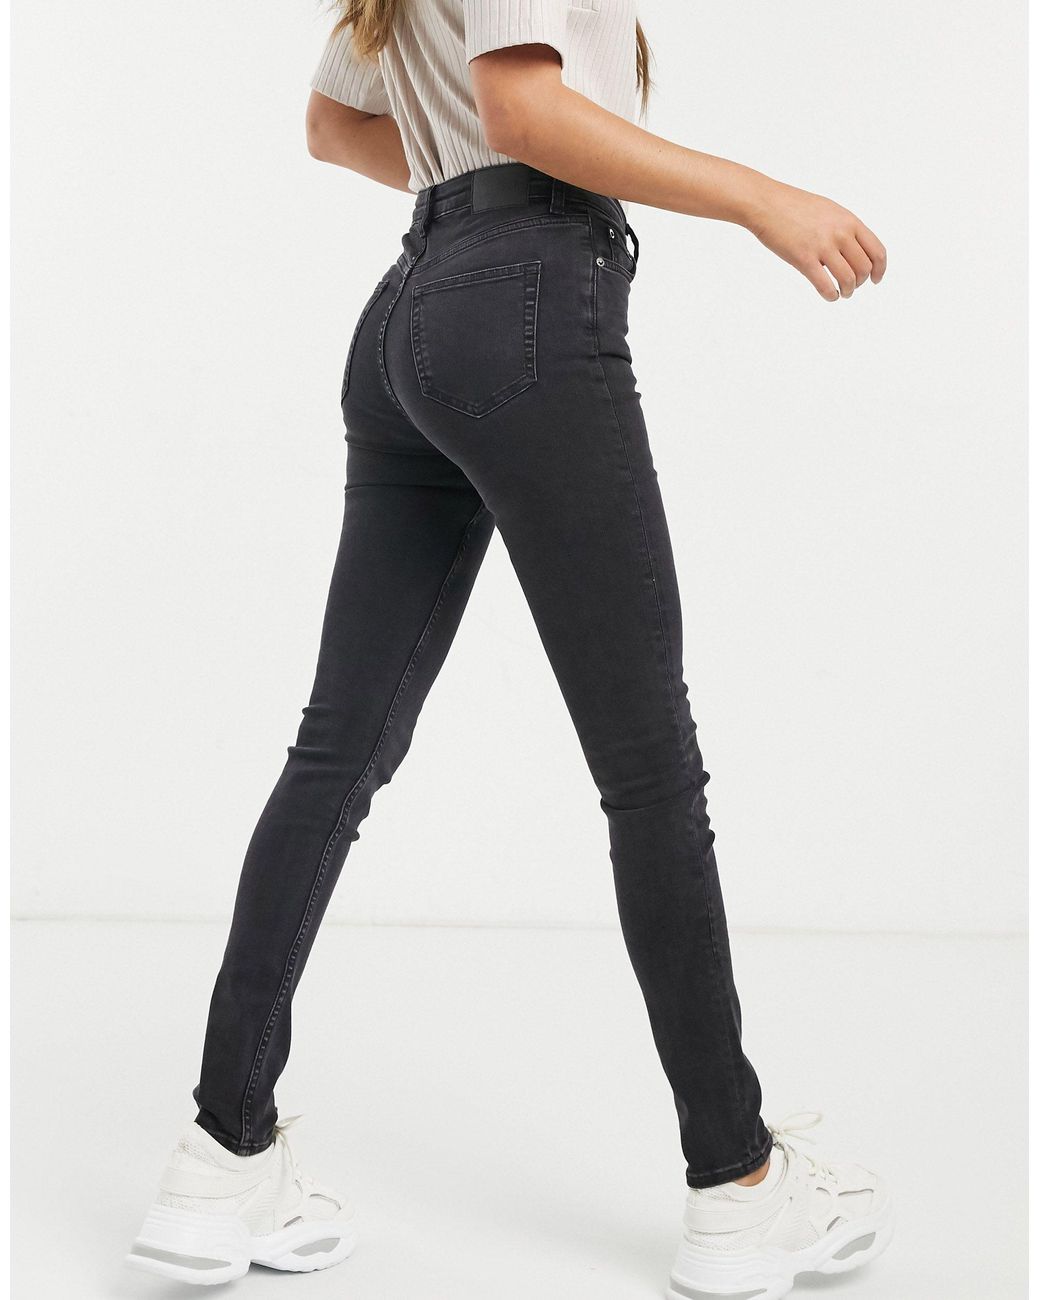 Weekday Thursday Cotton Blend High Waist Skinny Jeans in Black | Lyst